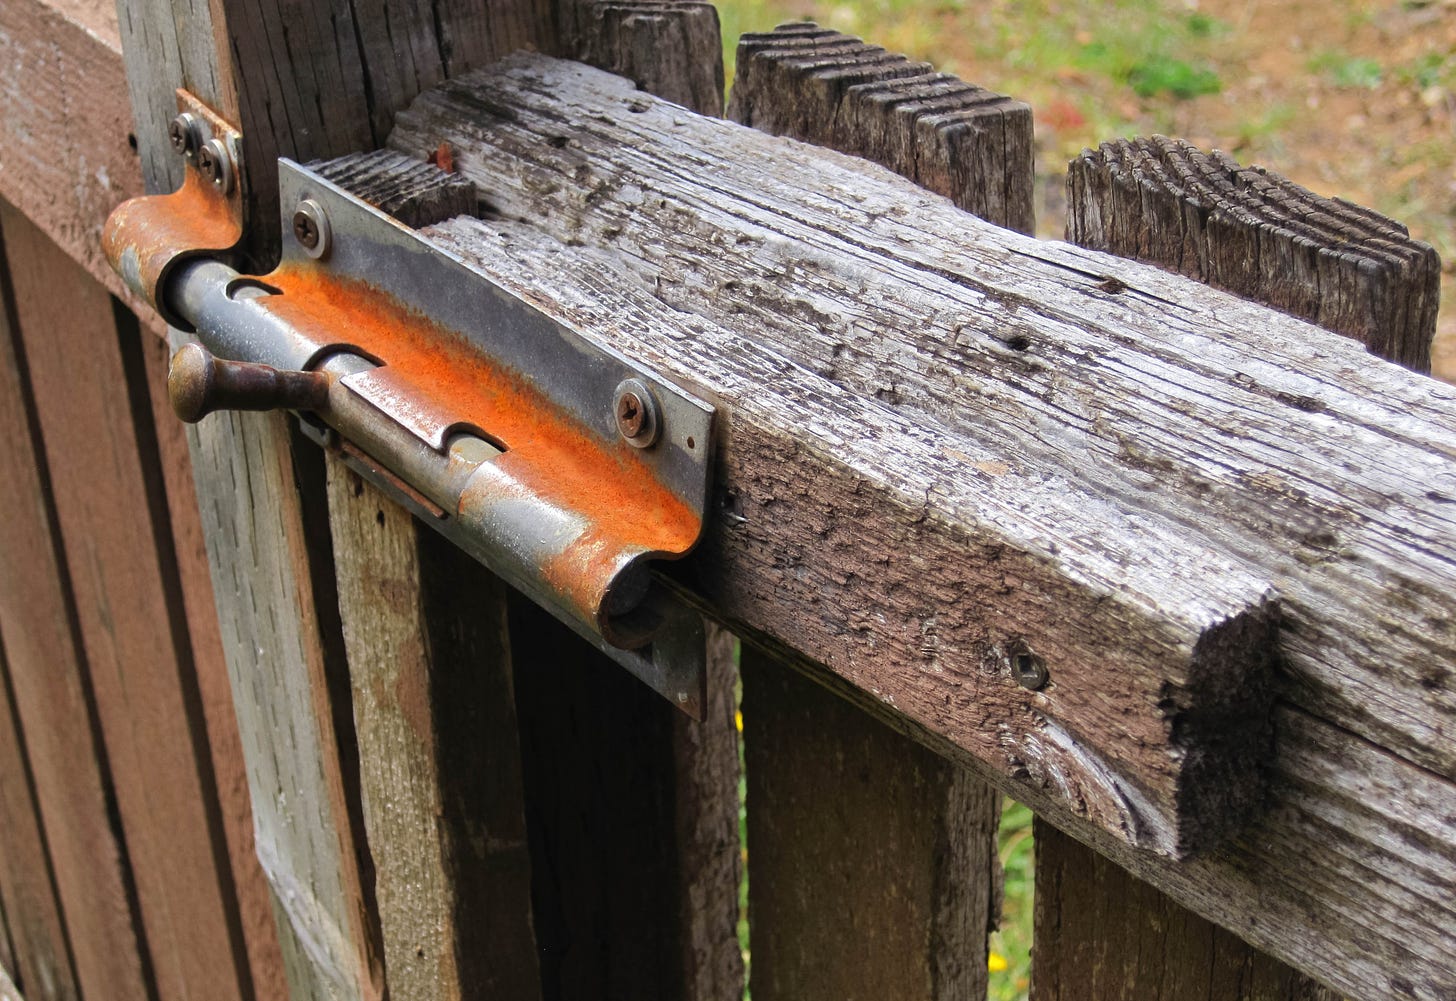 Aging, weather worn wooden fence with a rusty and oxidized slide lock on the gate